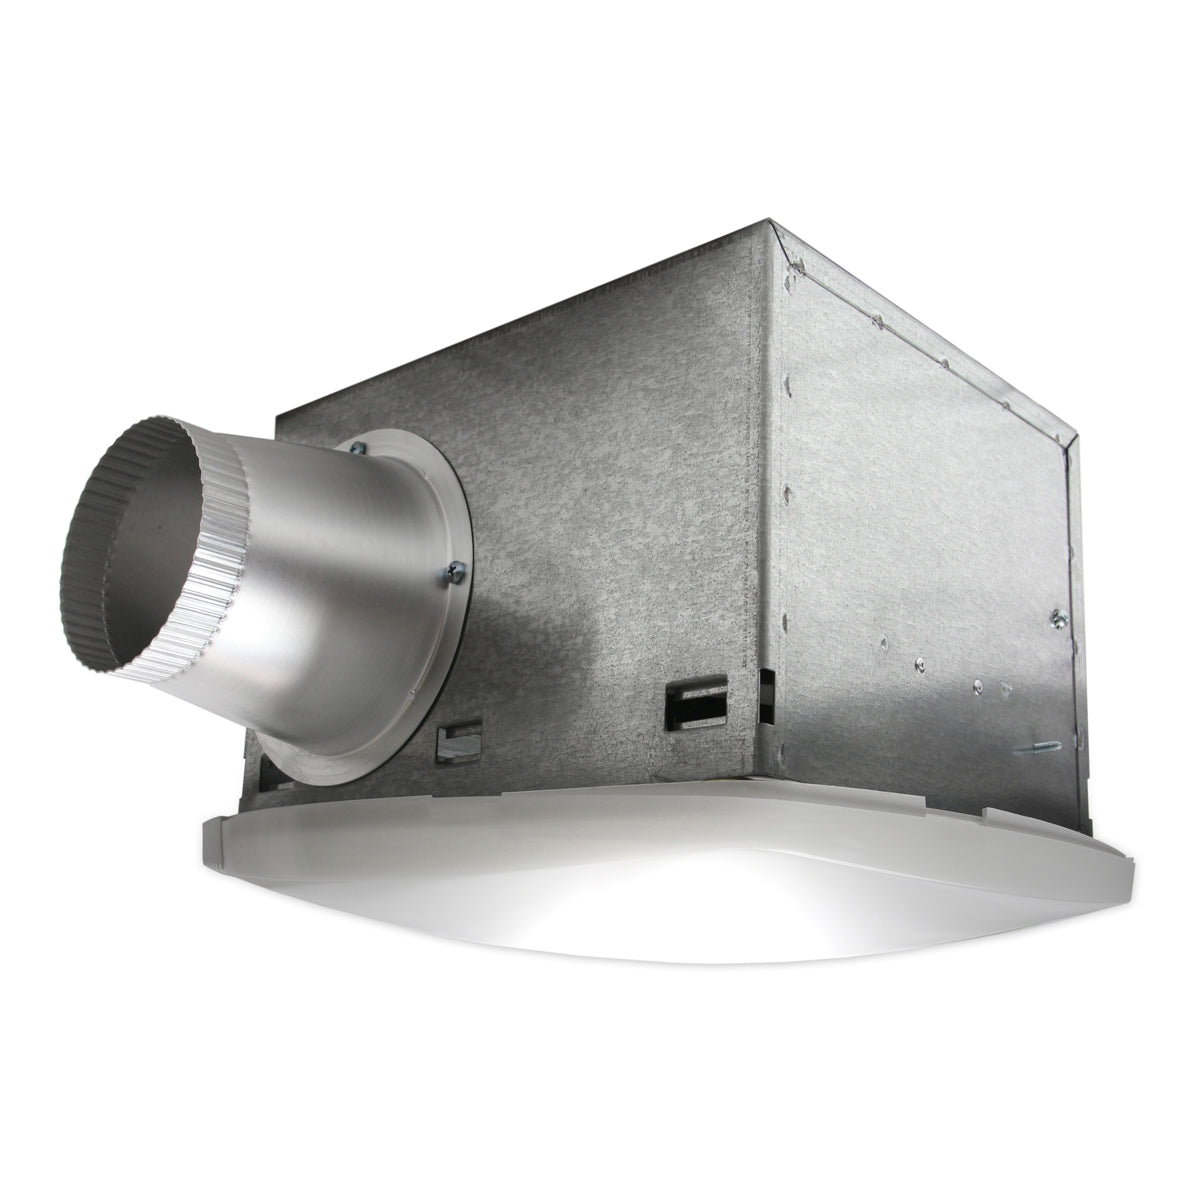 NuVent SH Series Lighted Ceiling Exhaust Bath Fans